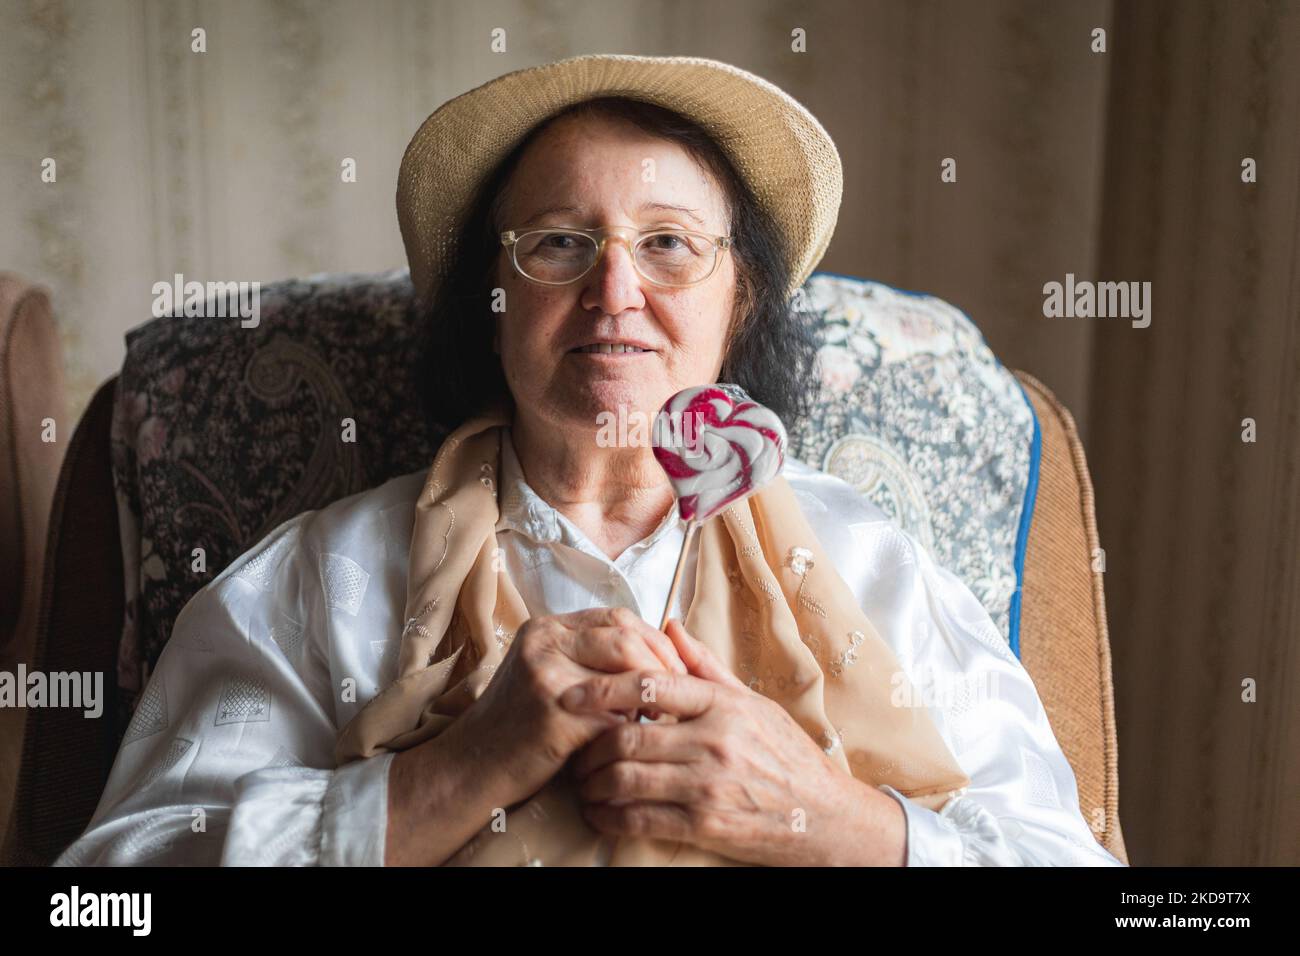 Elderly woman holding a candy lollipop, sitting in a chair Stock Photo